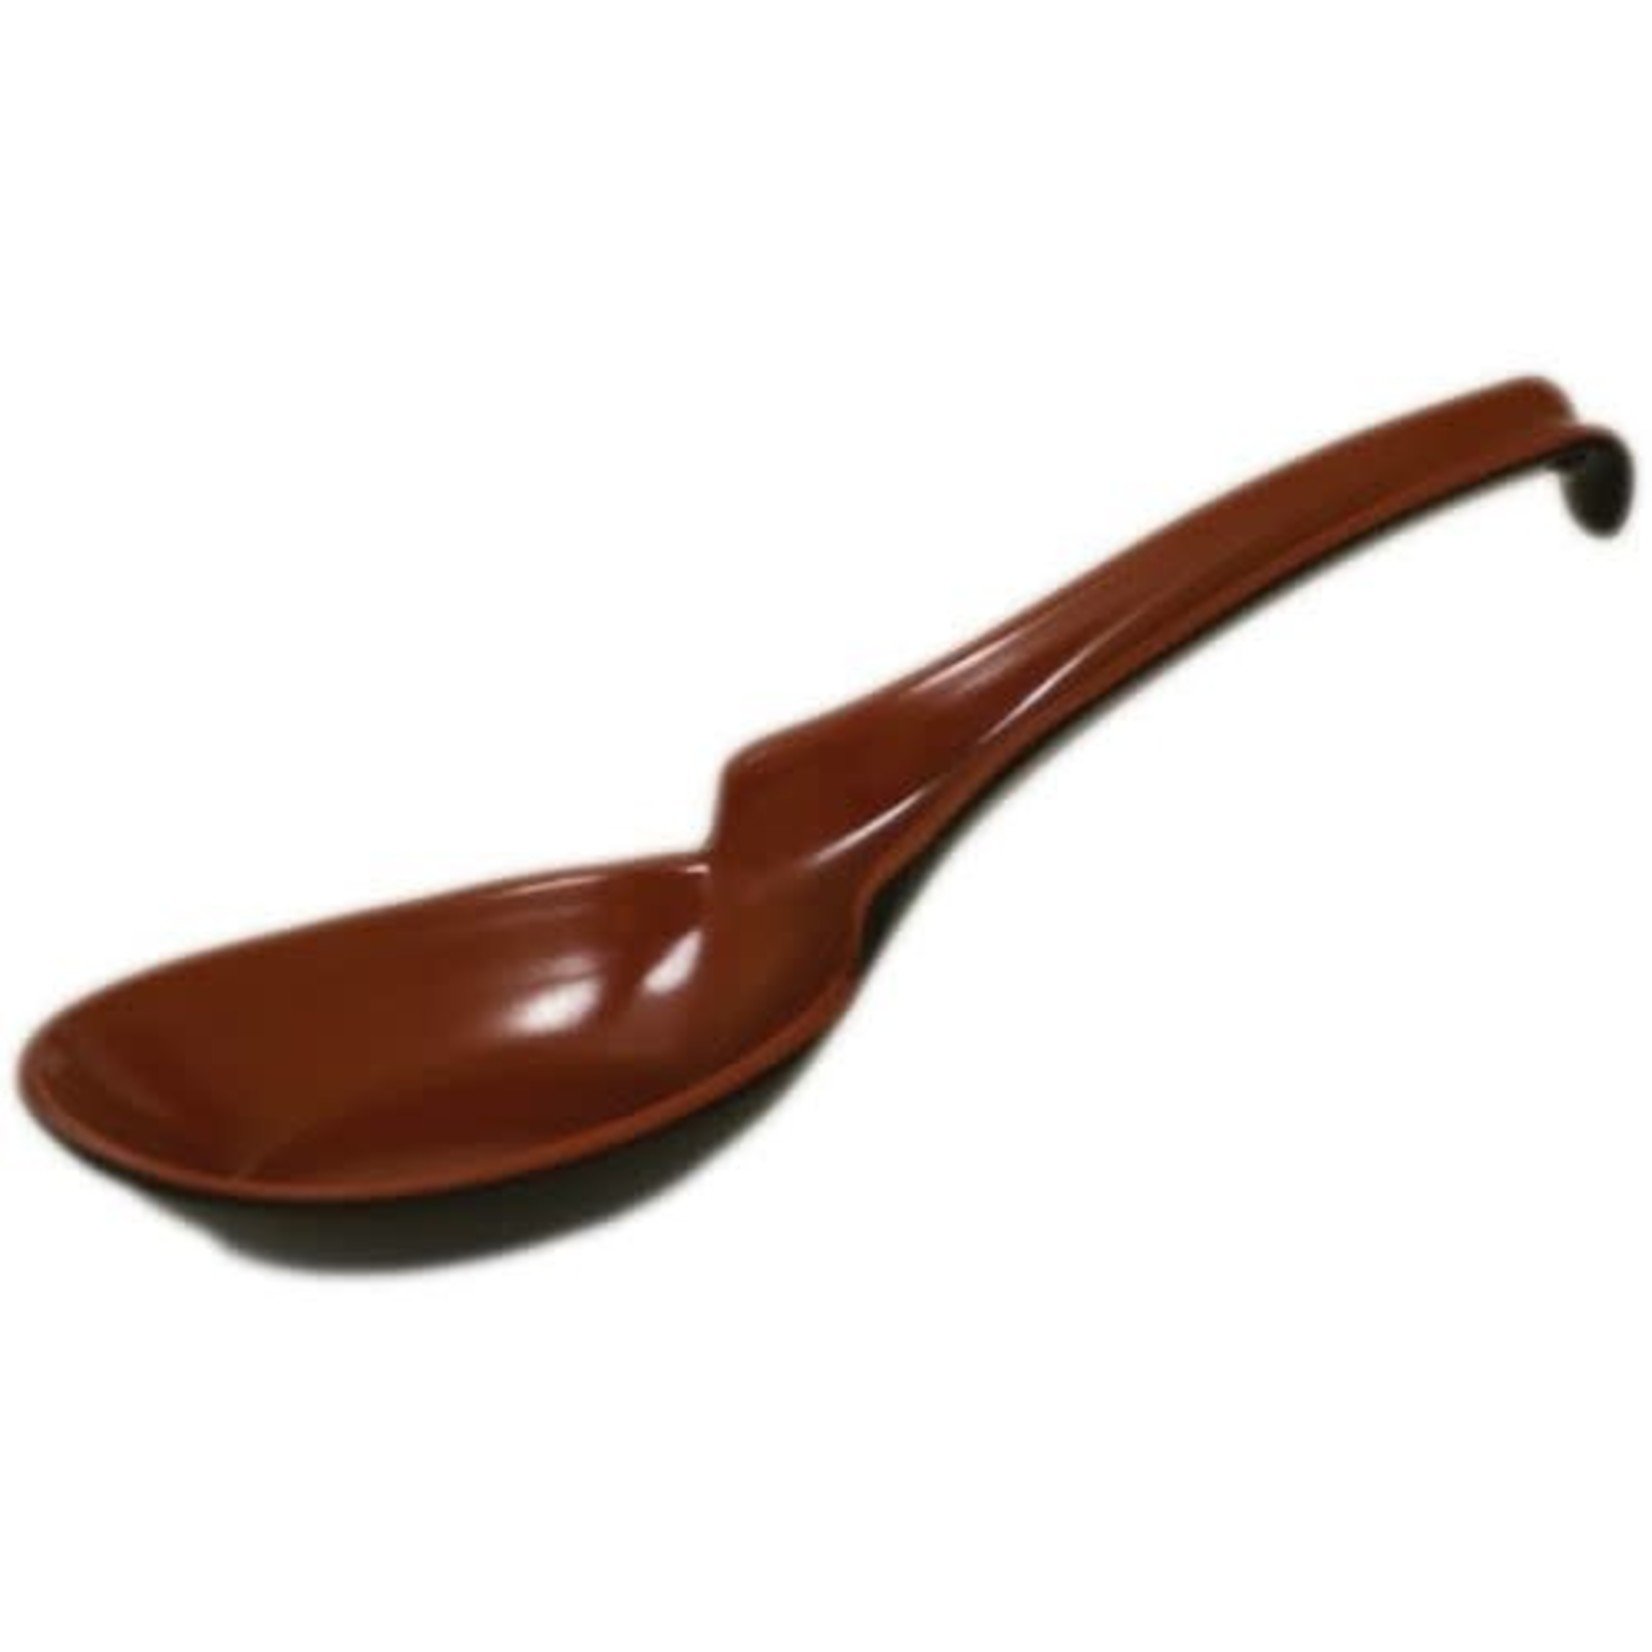 Spoon - Black/Red - 062-BR